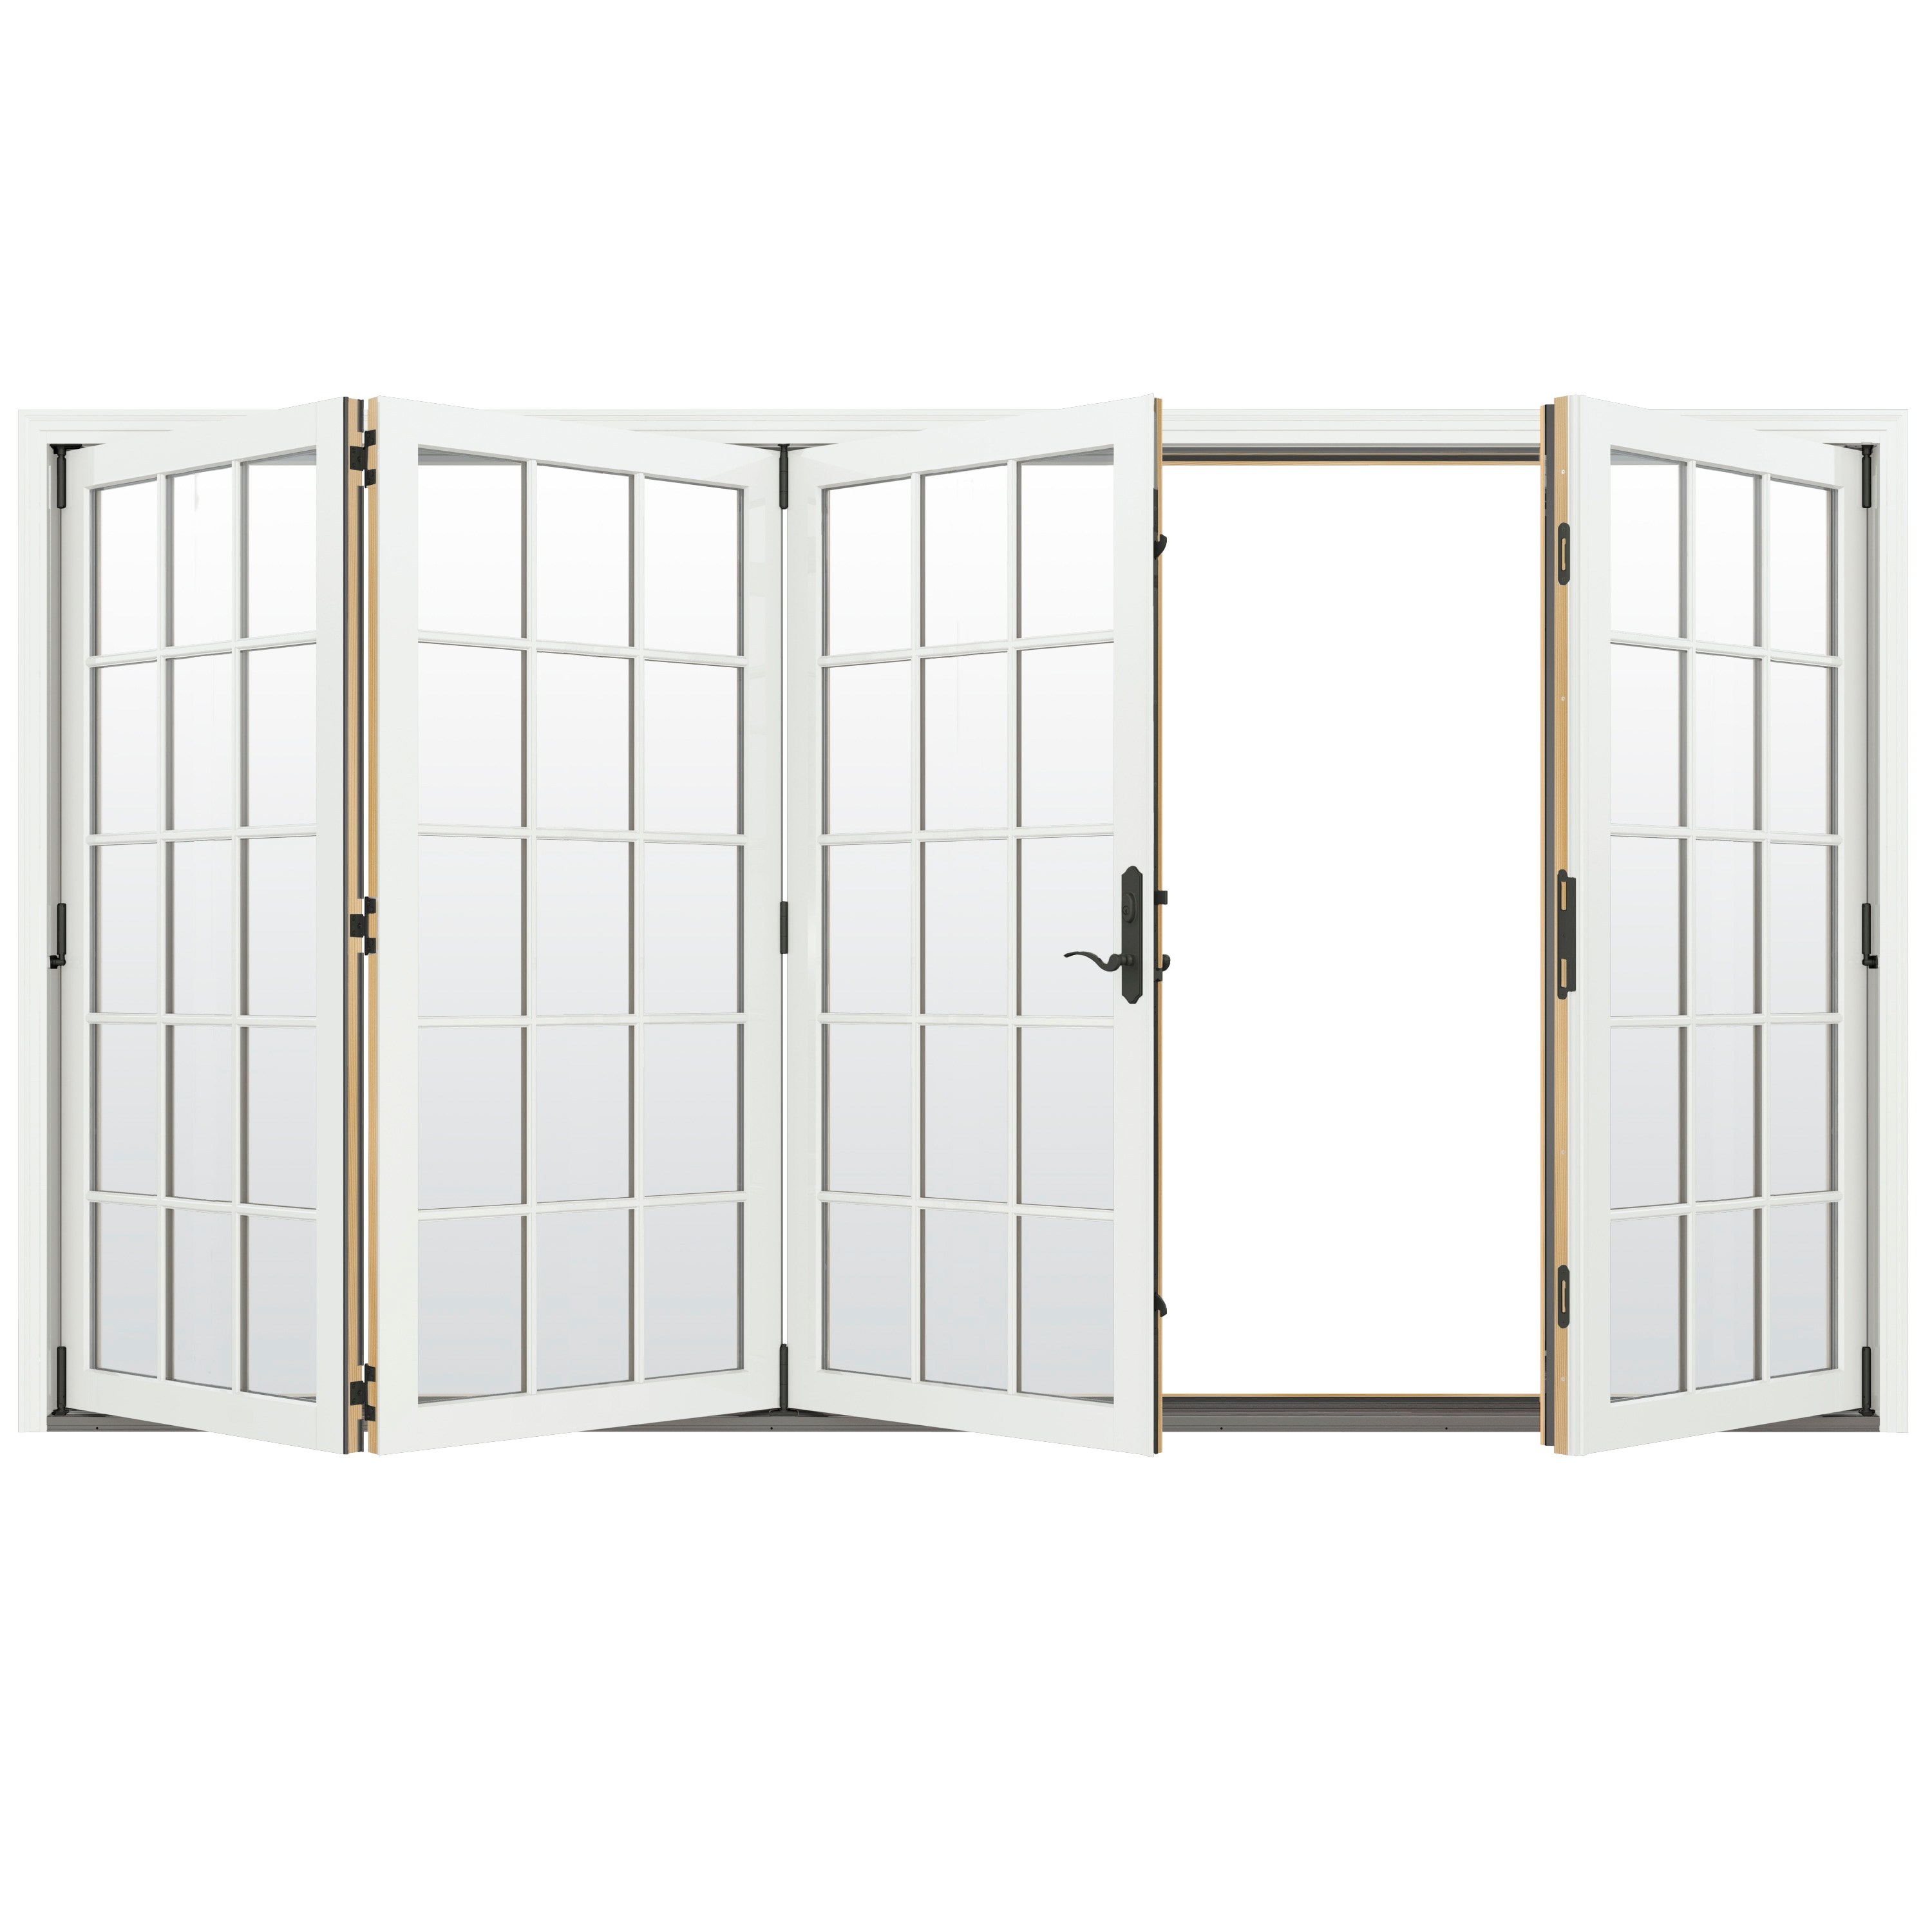 124-in x 96-in Low-e Argon Simulated Divided Light White Clad-wood Folding Left-Hand Outswing Patio Door | - JELD-WEN LOWOLJW247800136